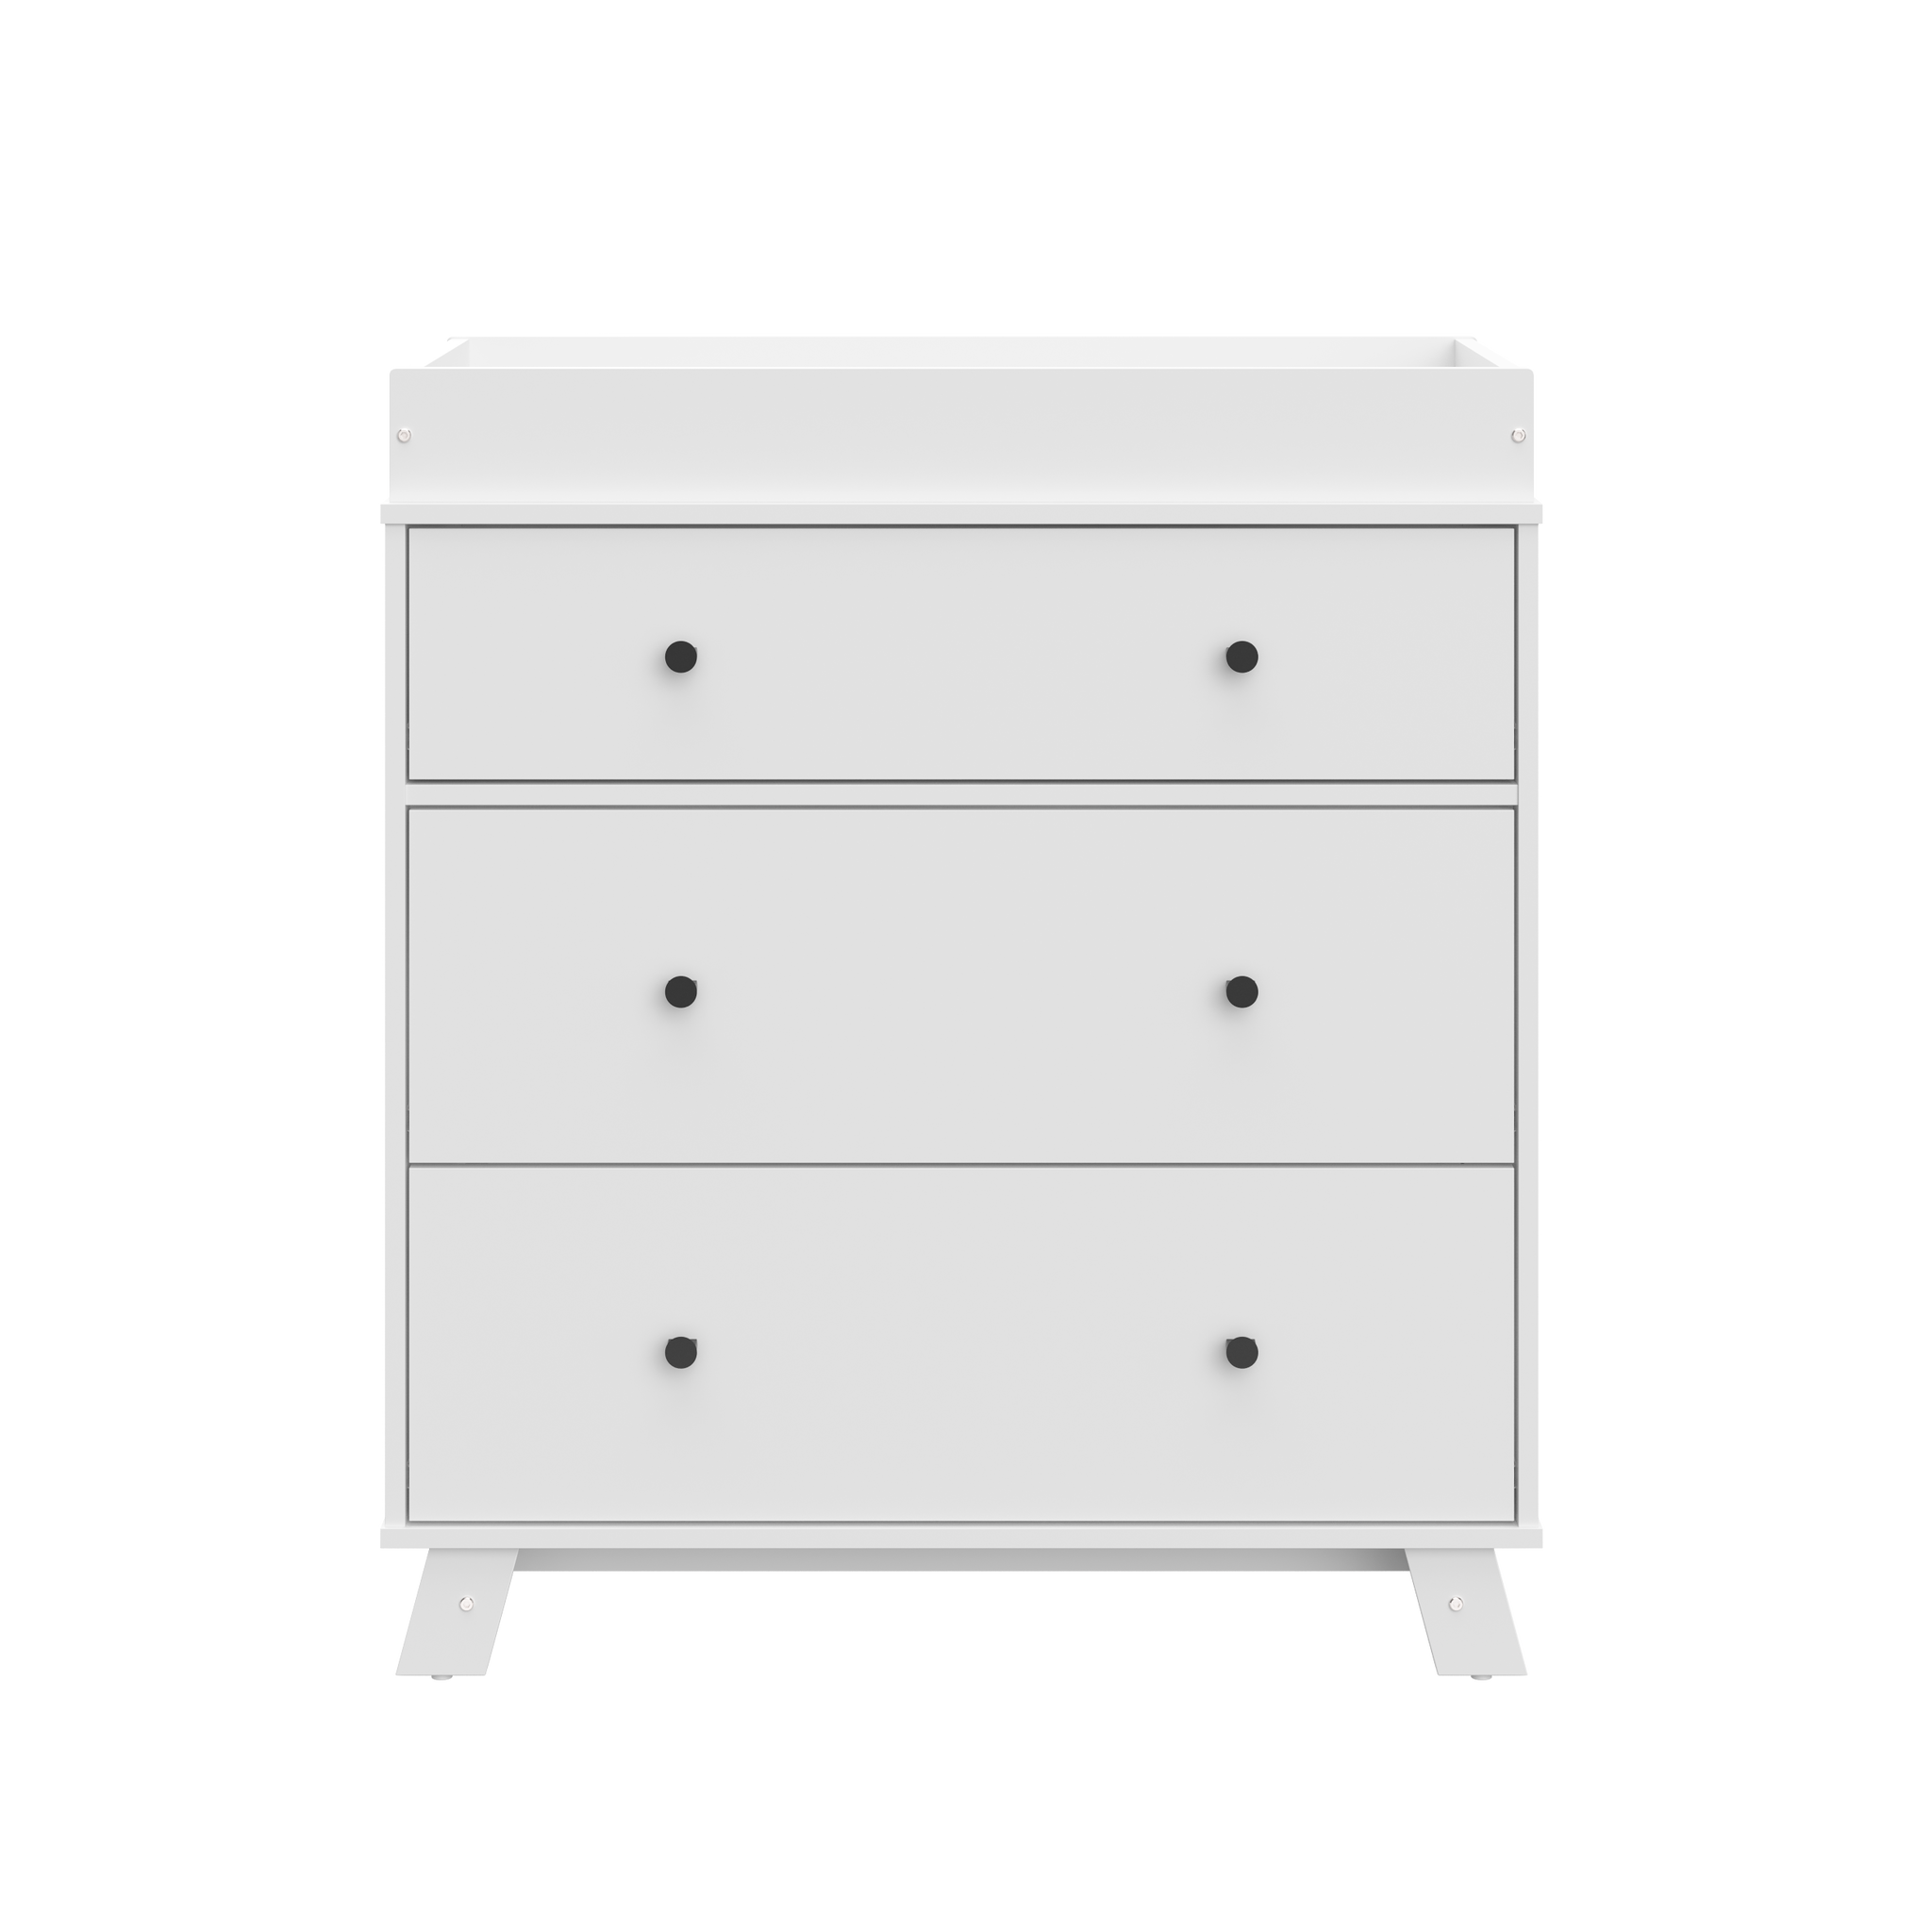 Front view of white 3 drawer chest